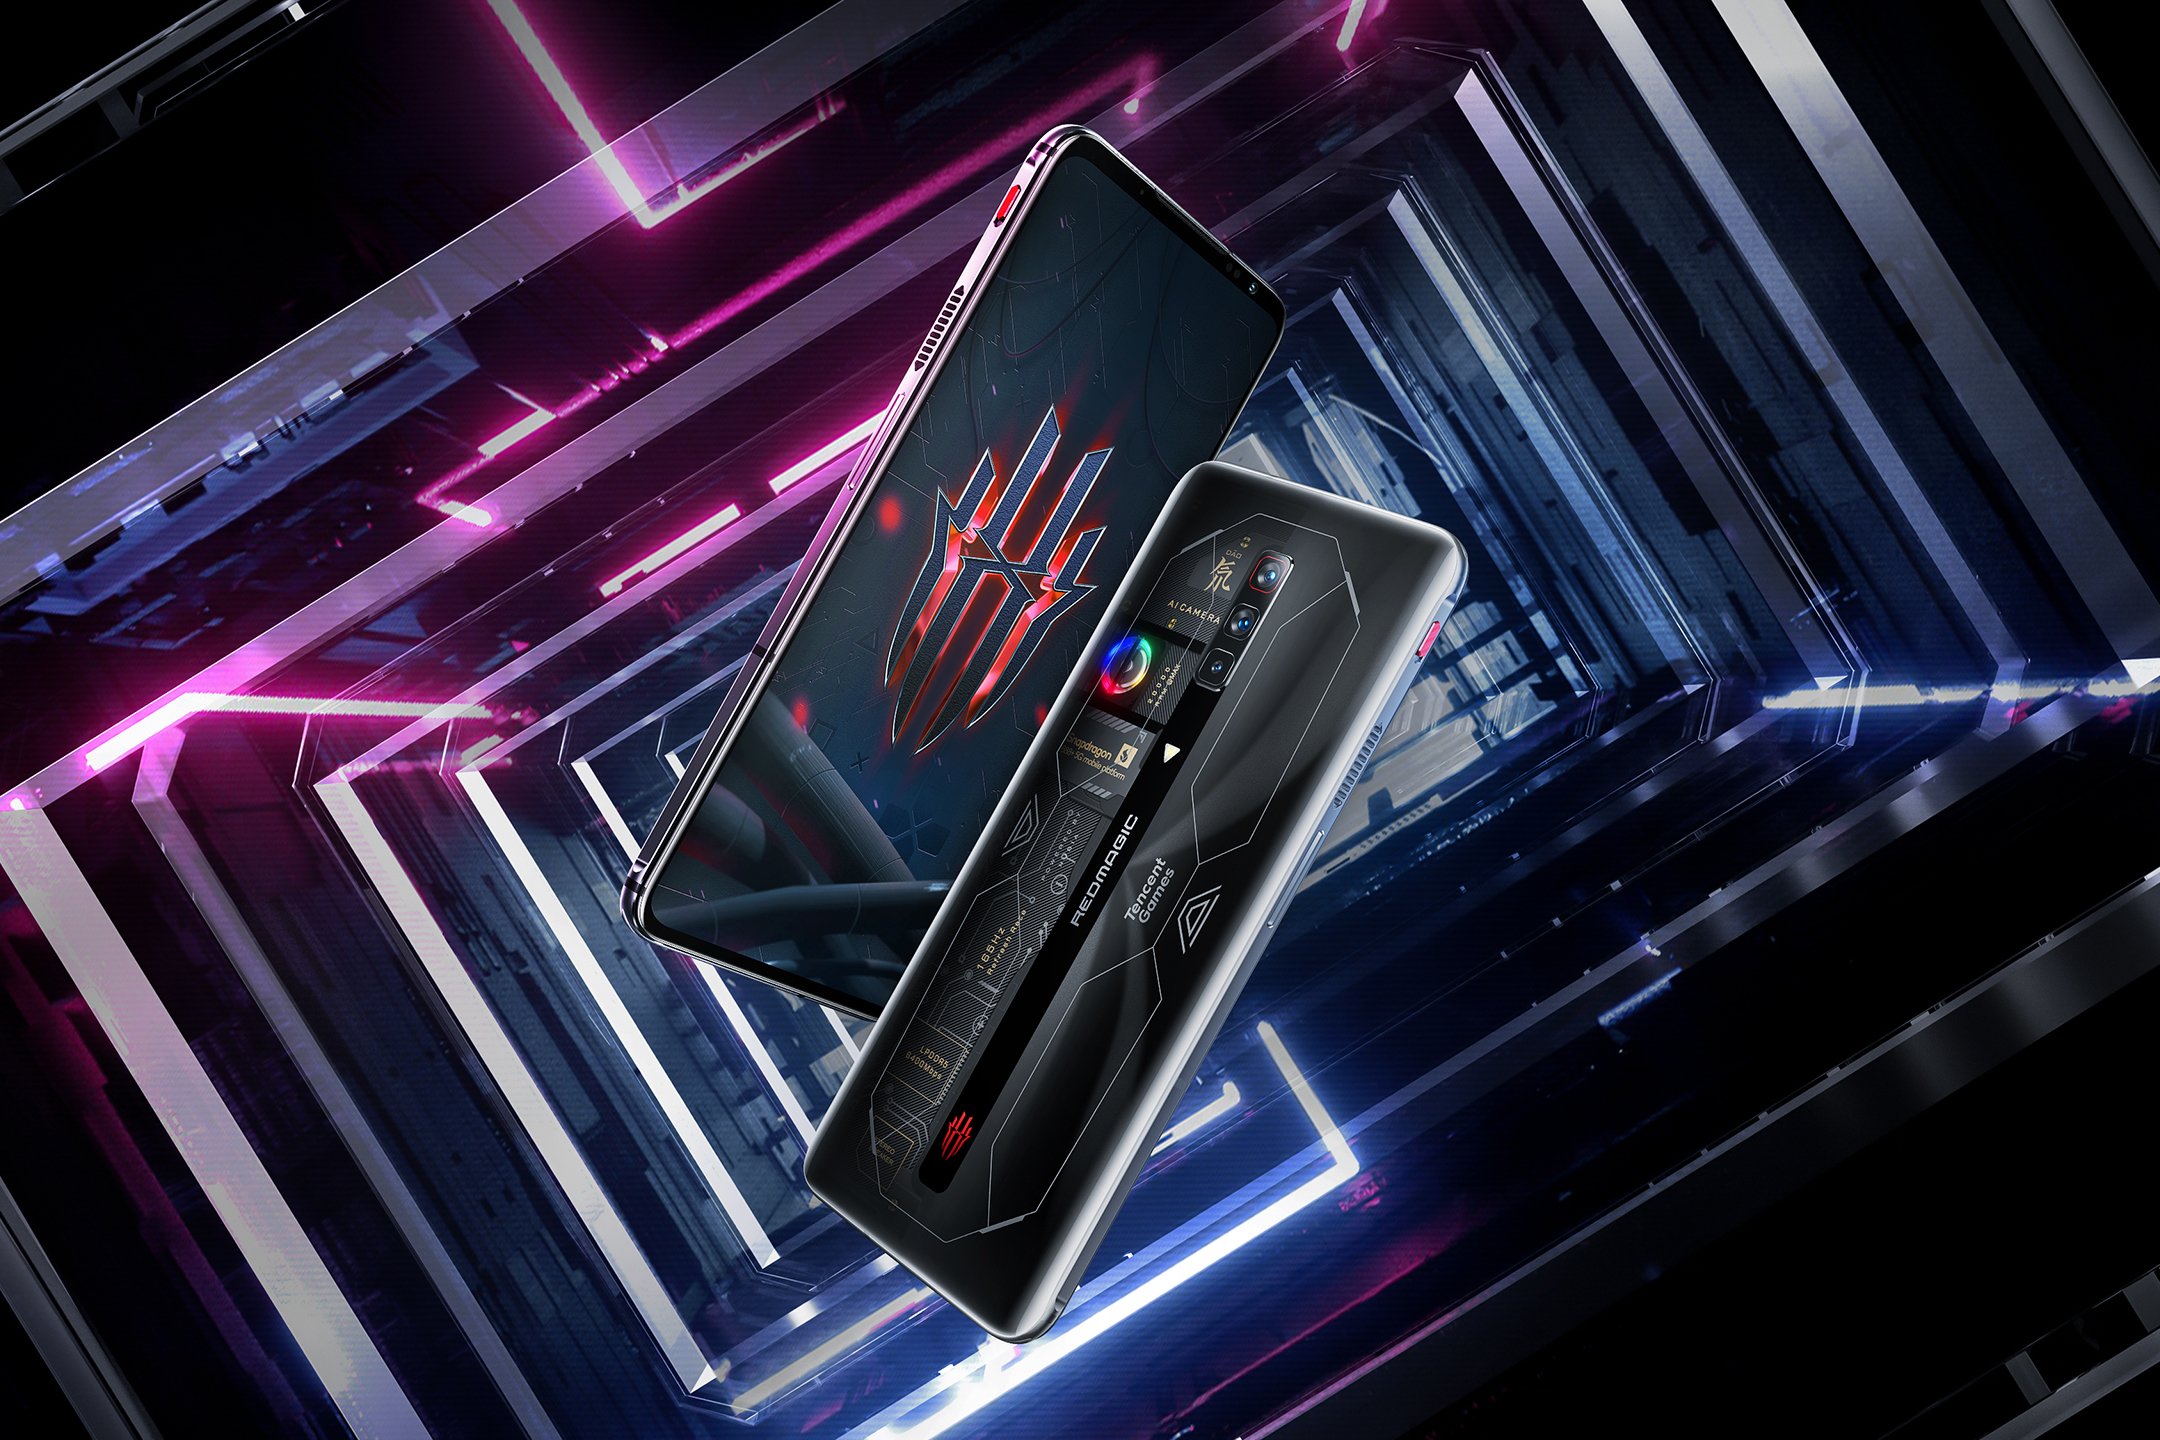 REDMAGIC 6S Pro launched with Snapdragon 888+ & more - Gizmochina